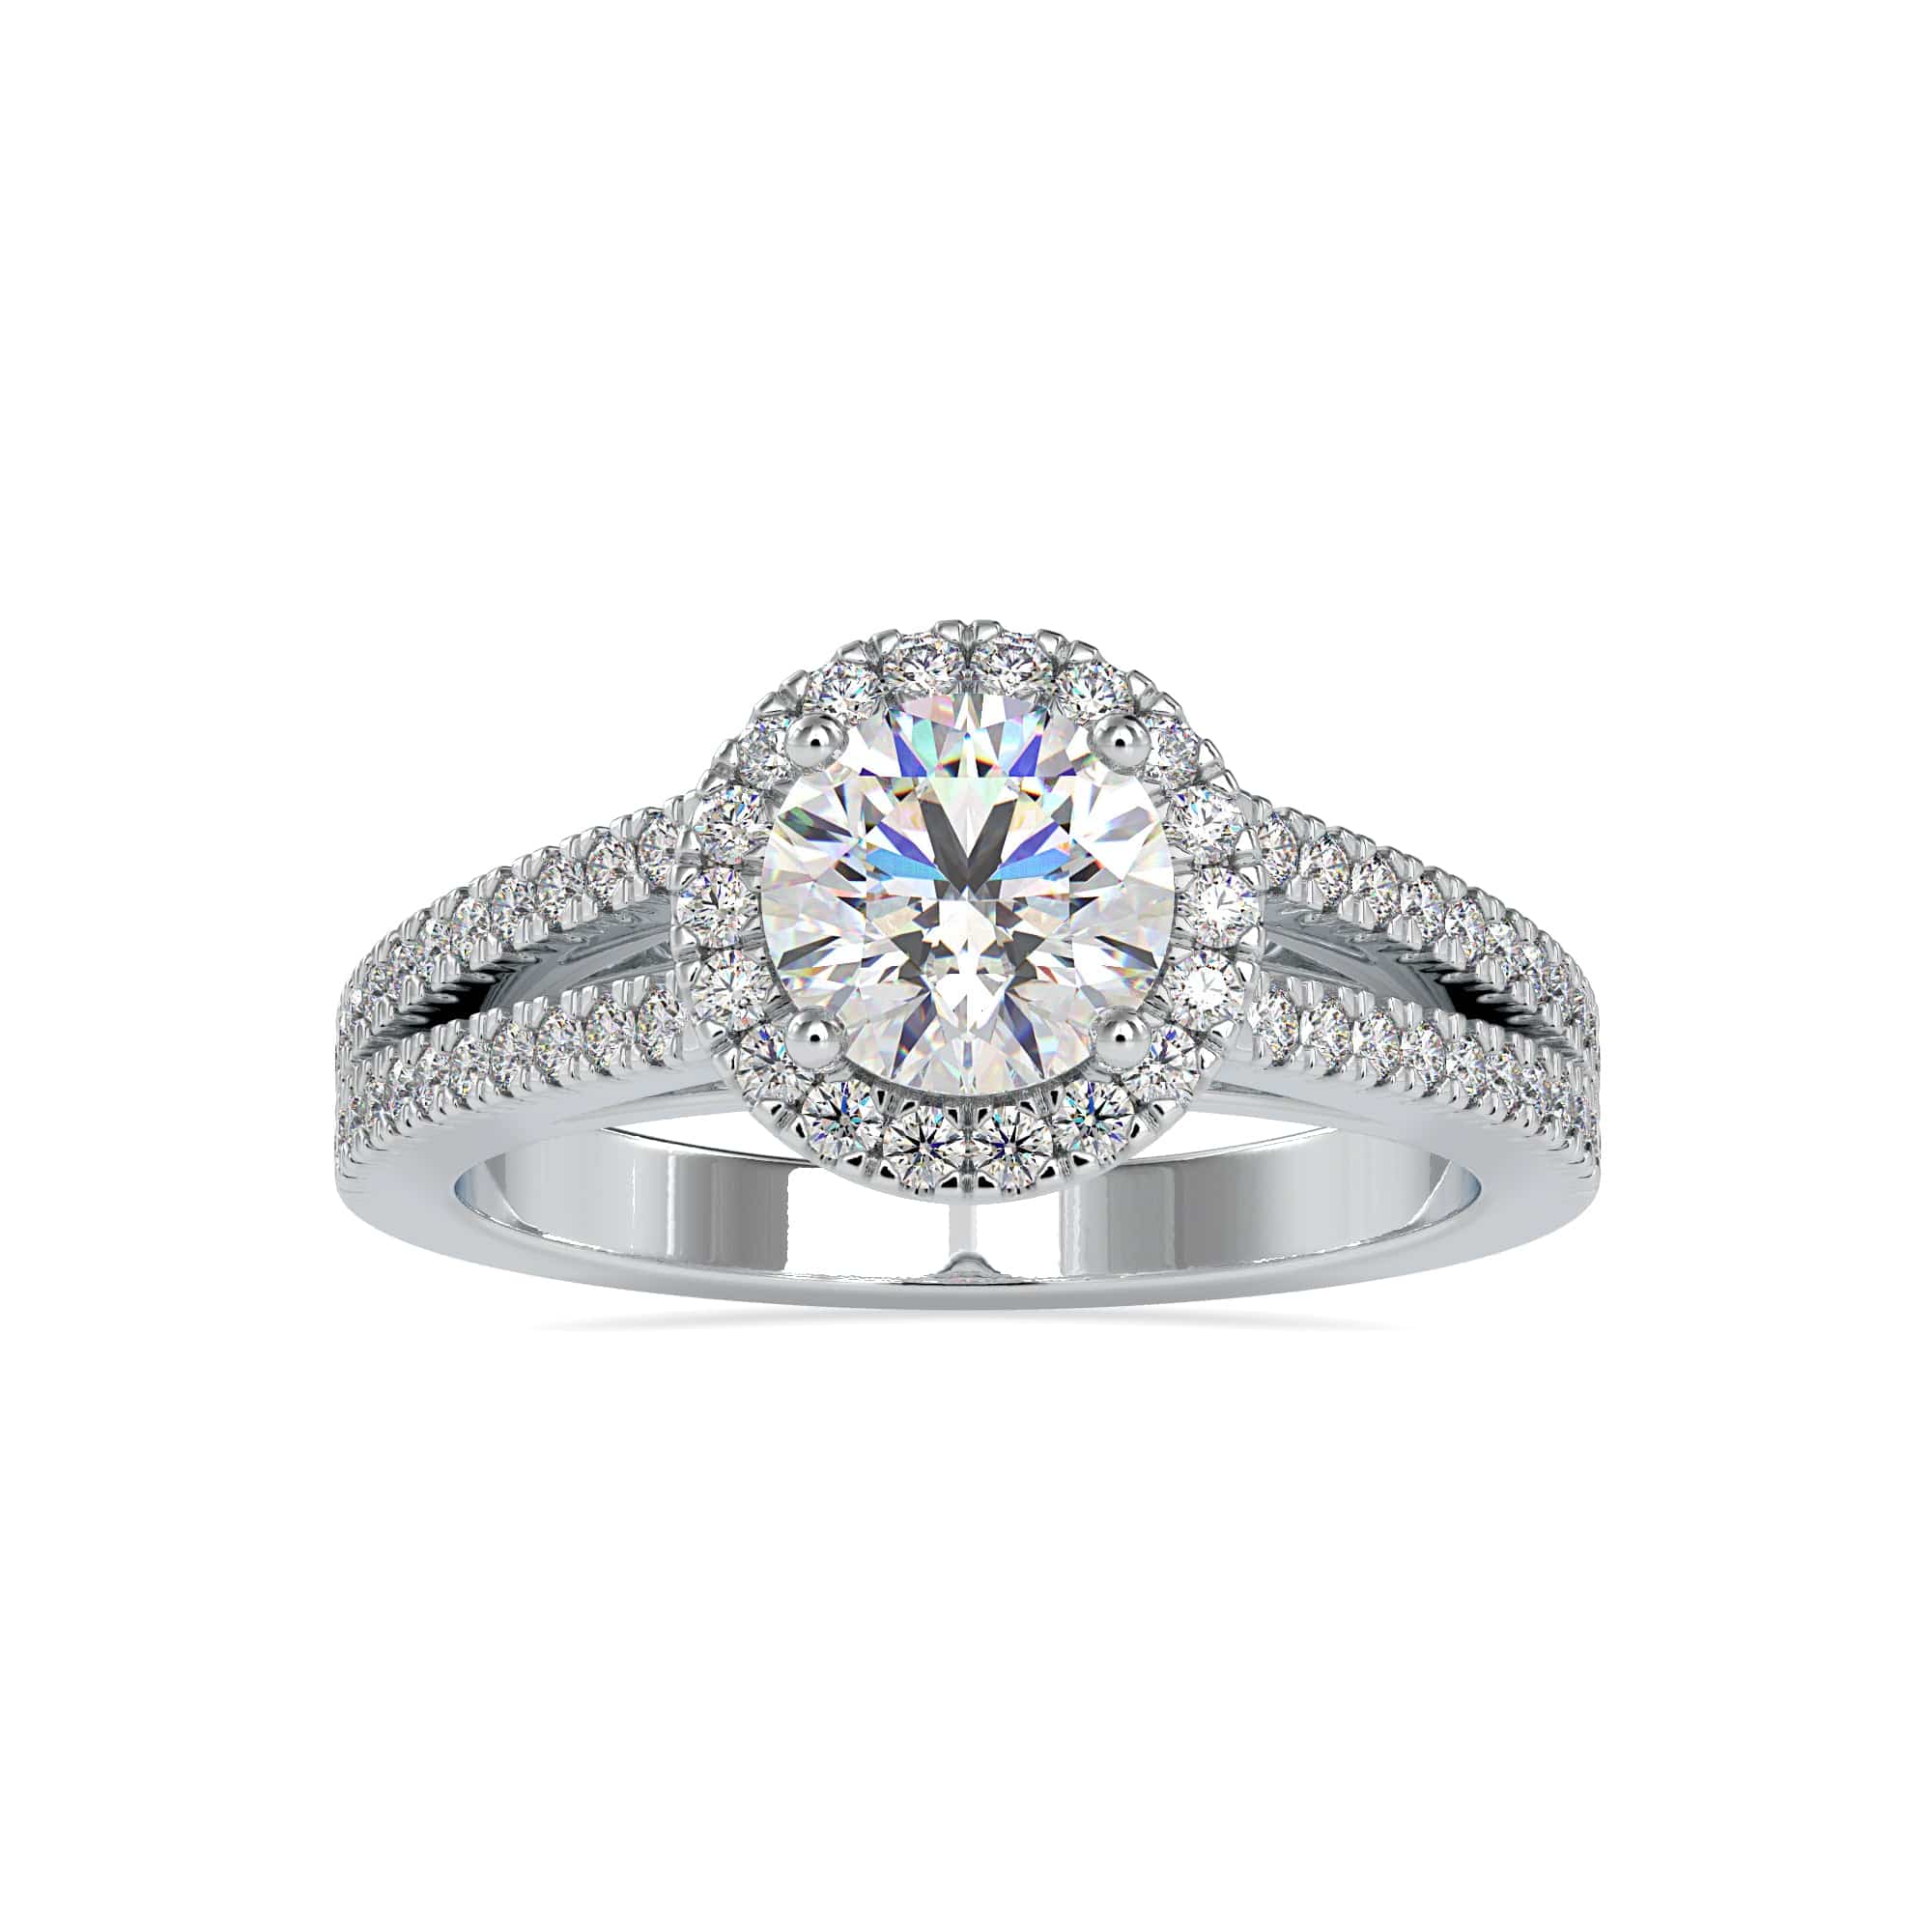 Double Halo Round Engagement Ring with Pink Diamonds – deBebians